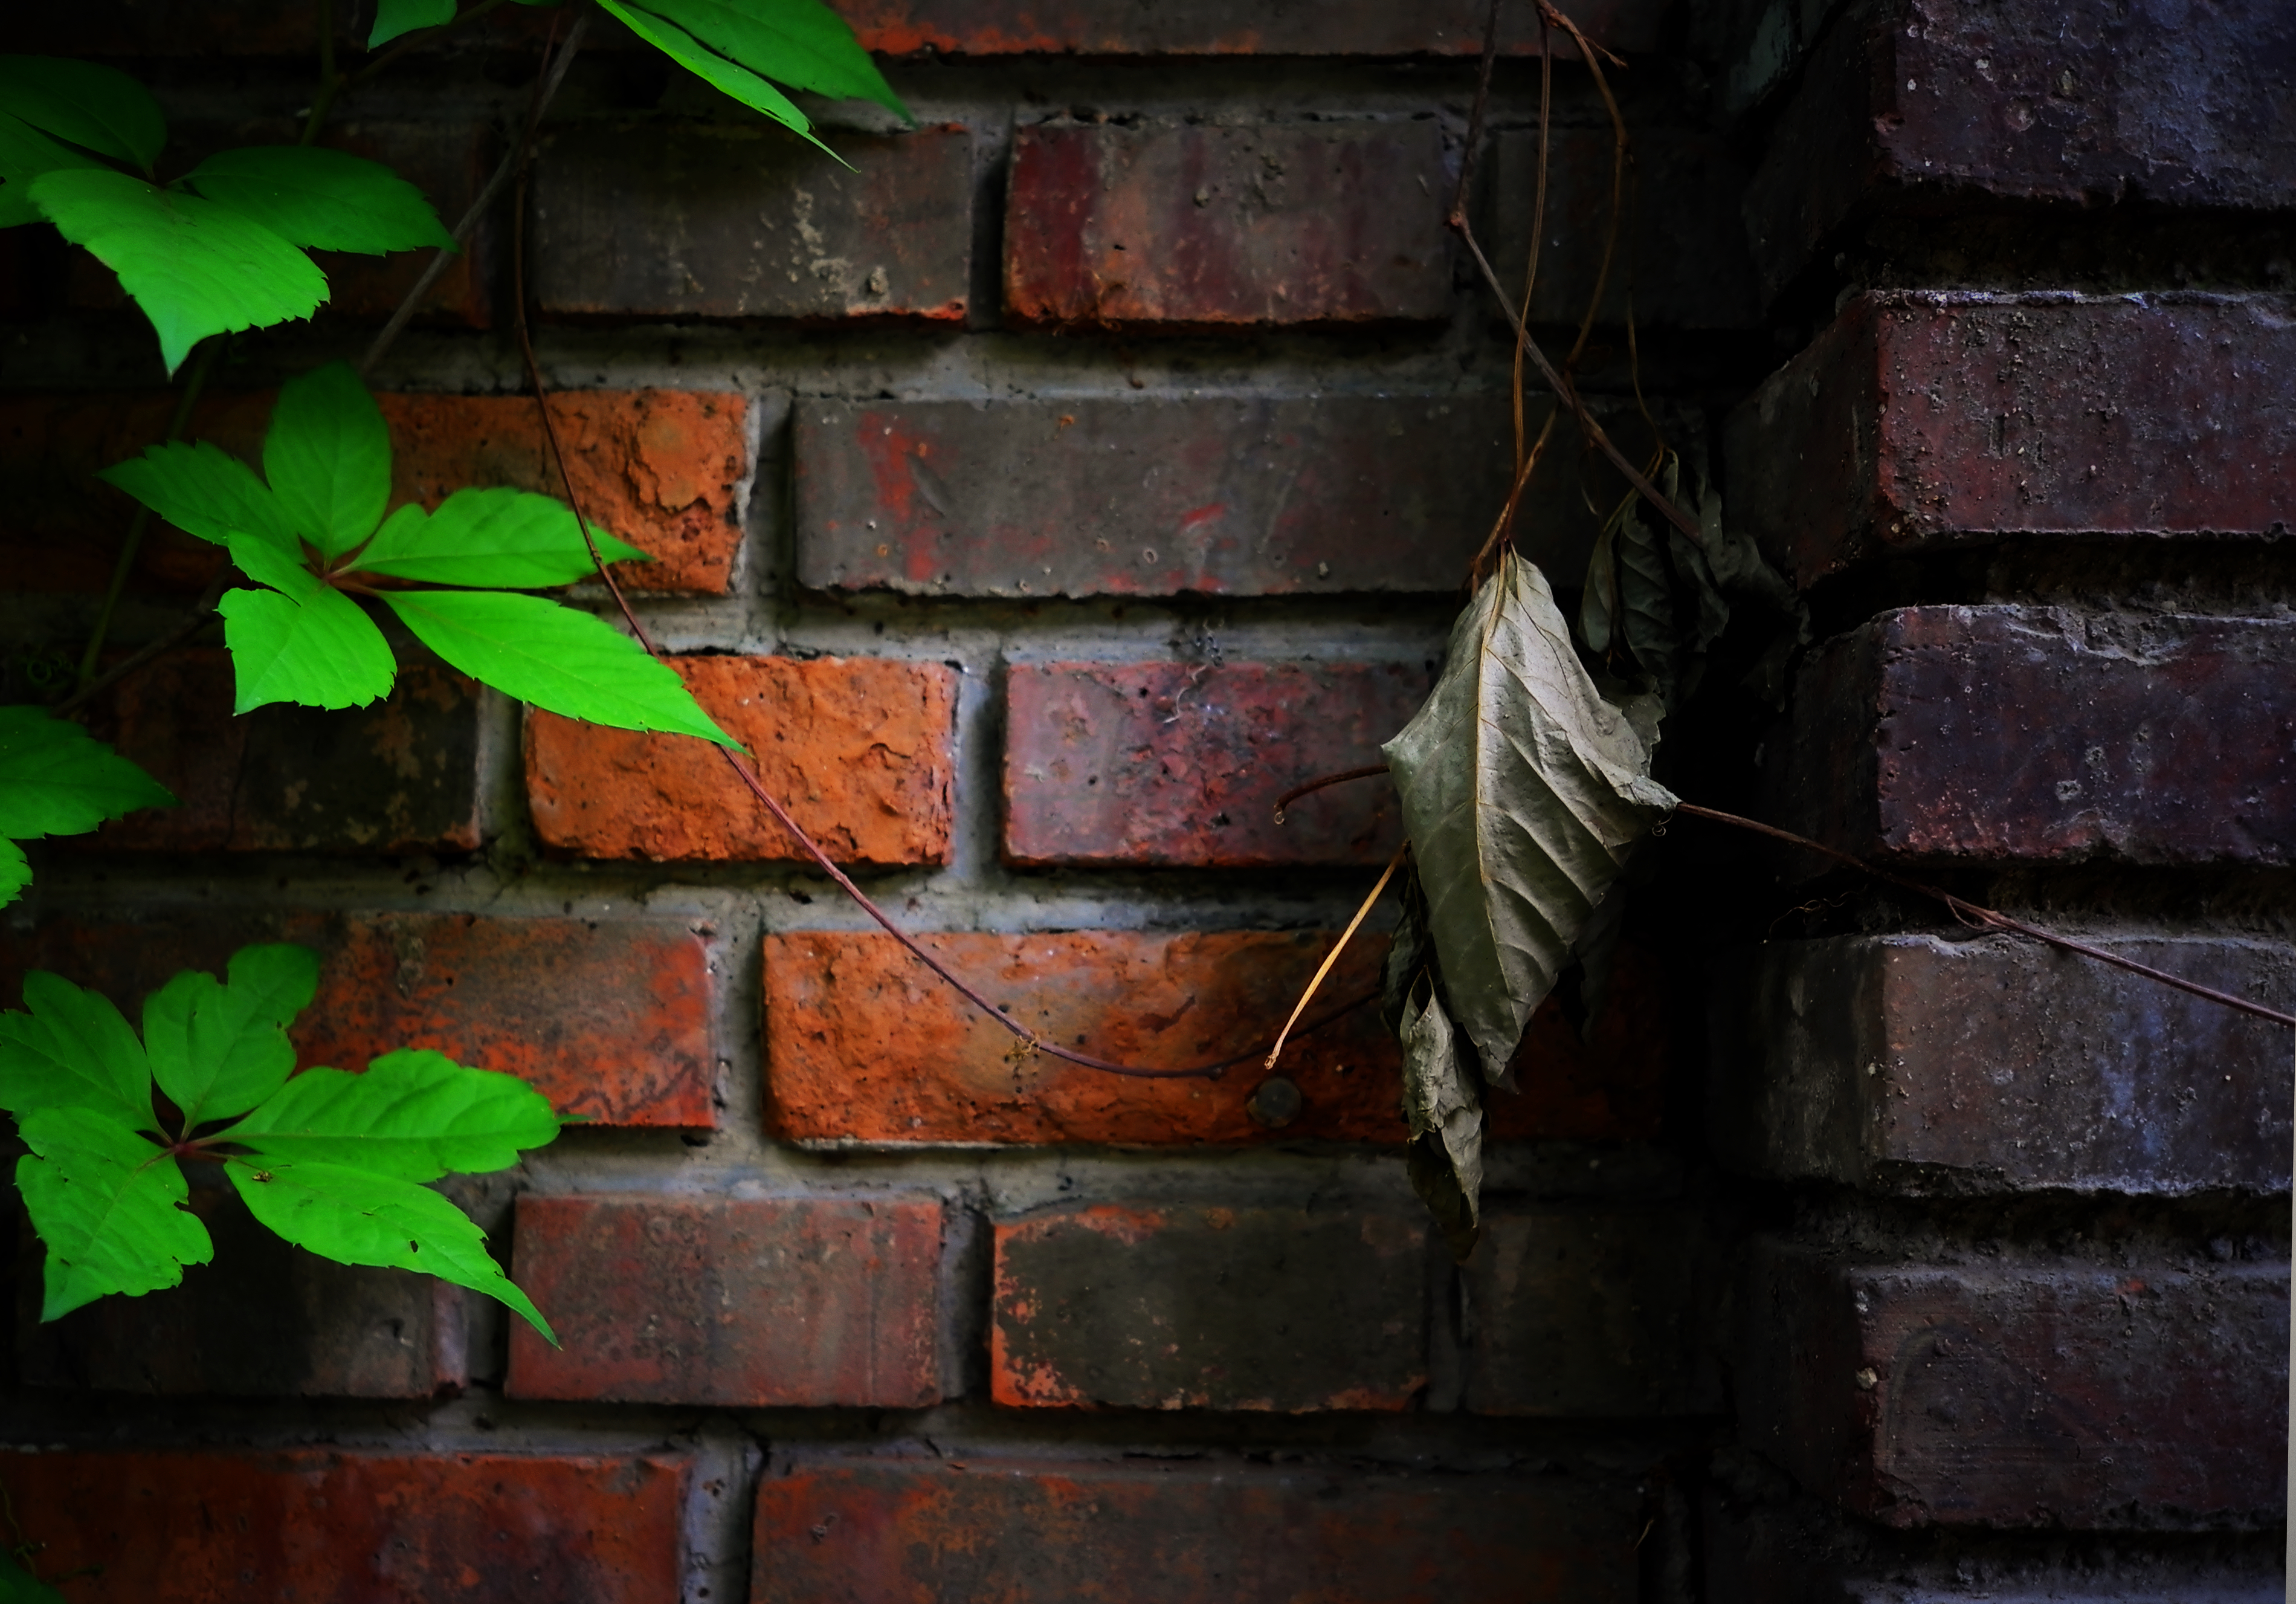 Wallpaper : window, red, wall, wood, green, texture, life, Brick, color, plant, leicax aesthetic, material, darkness, soil 3800x2654